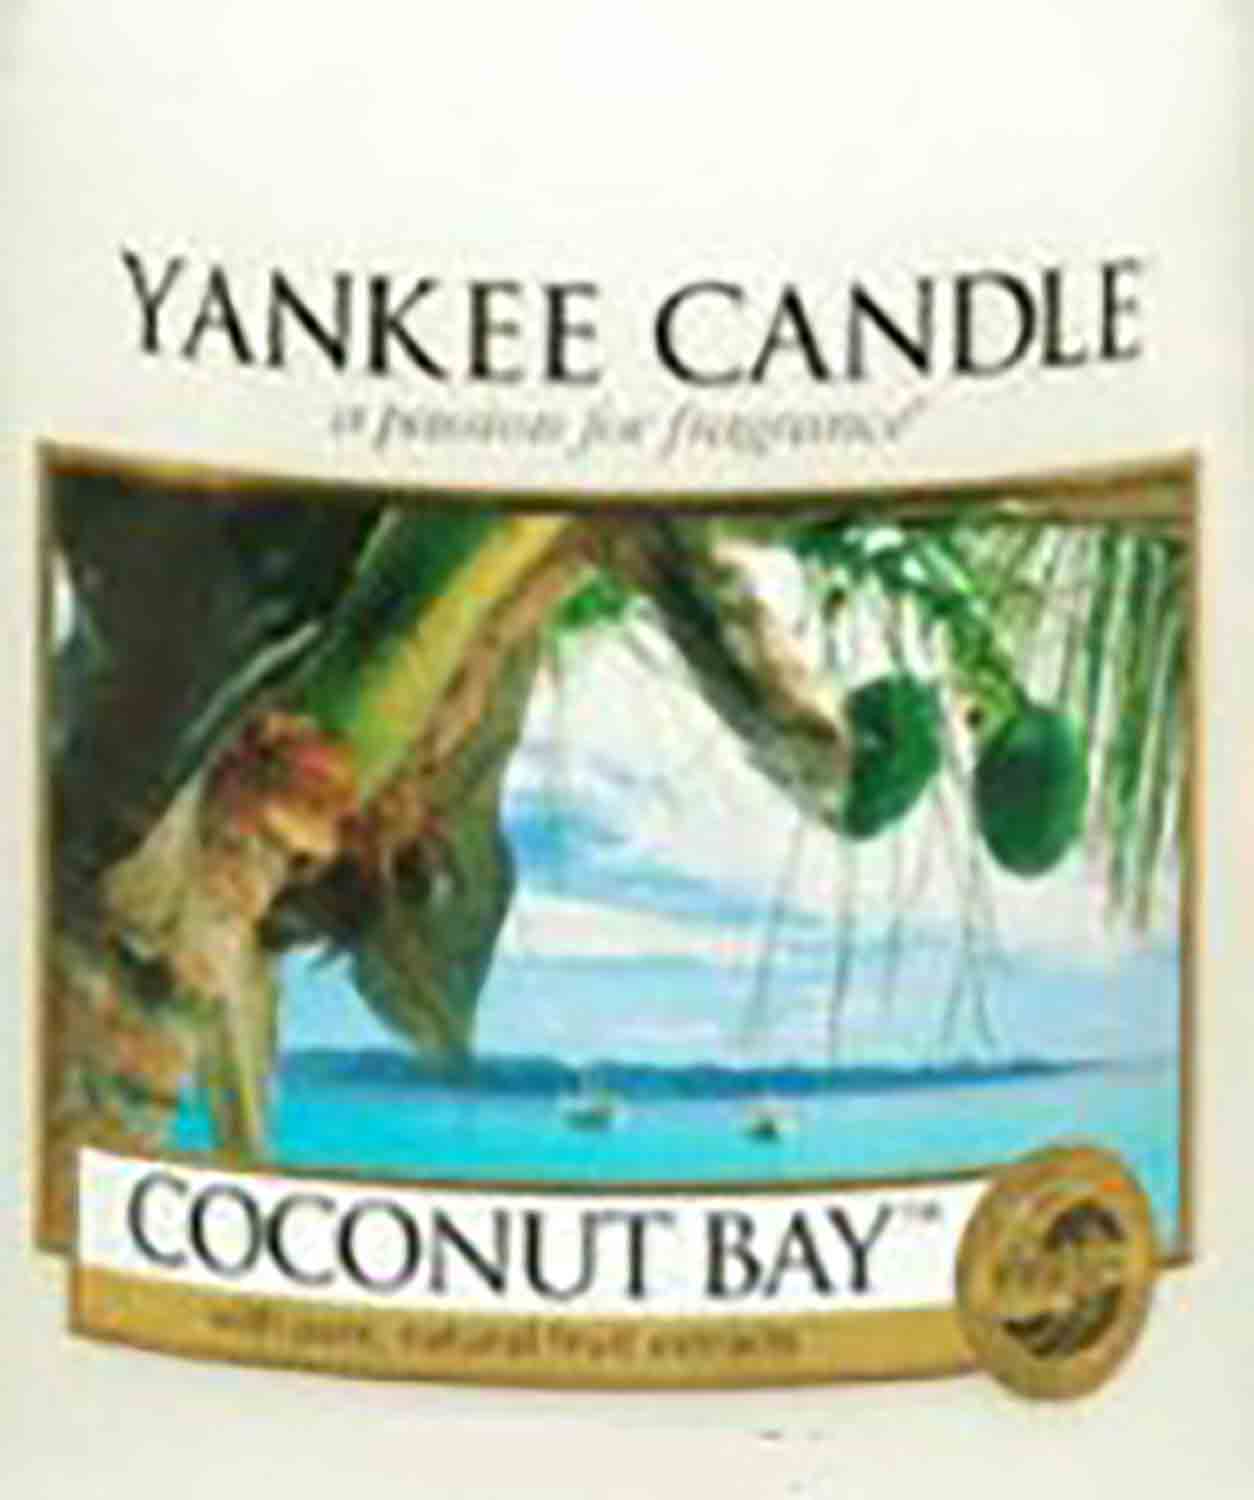 Yankee Candle Coconut Bay USA 22g - Crumble vosk